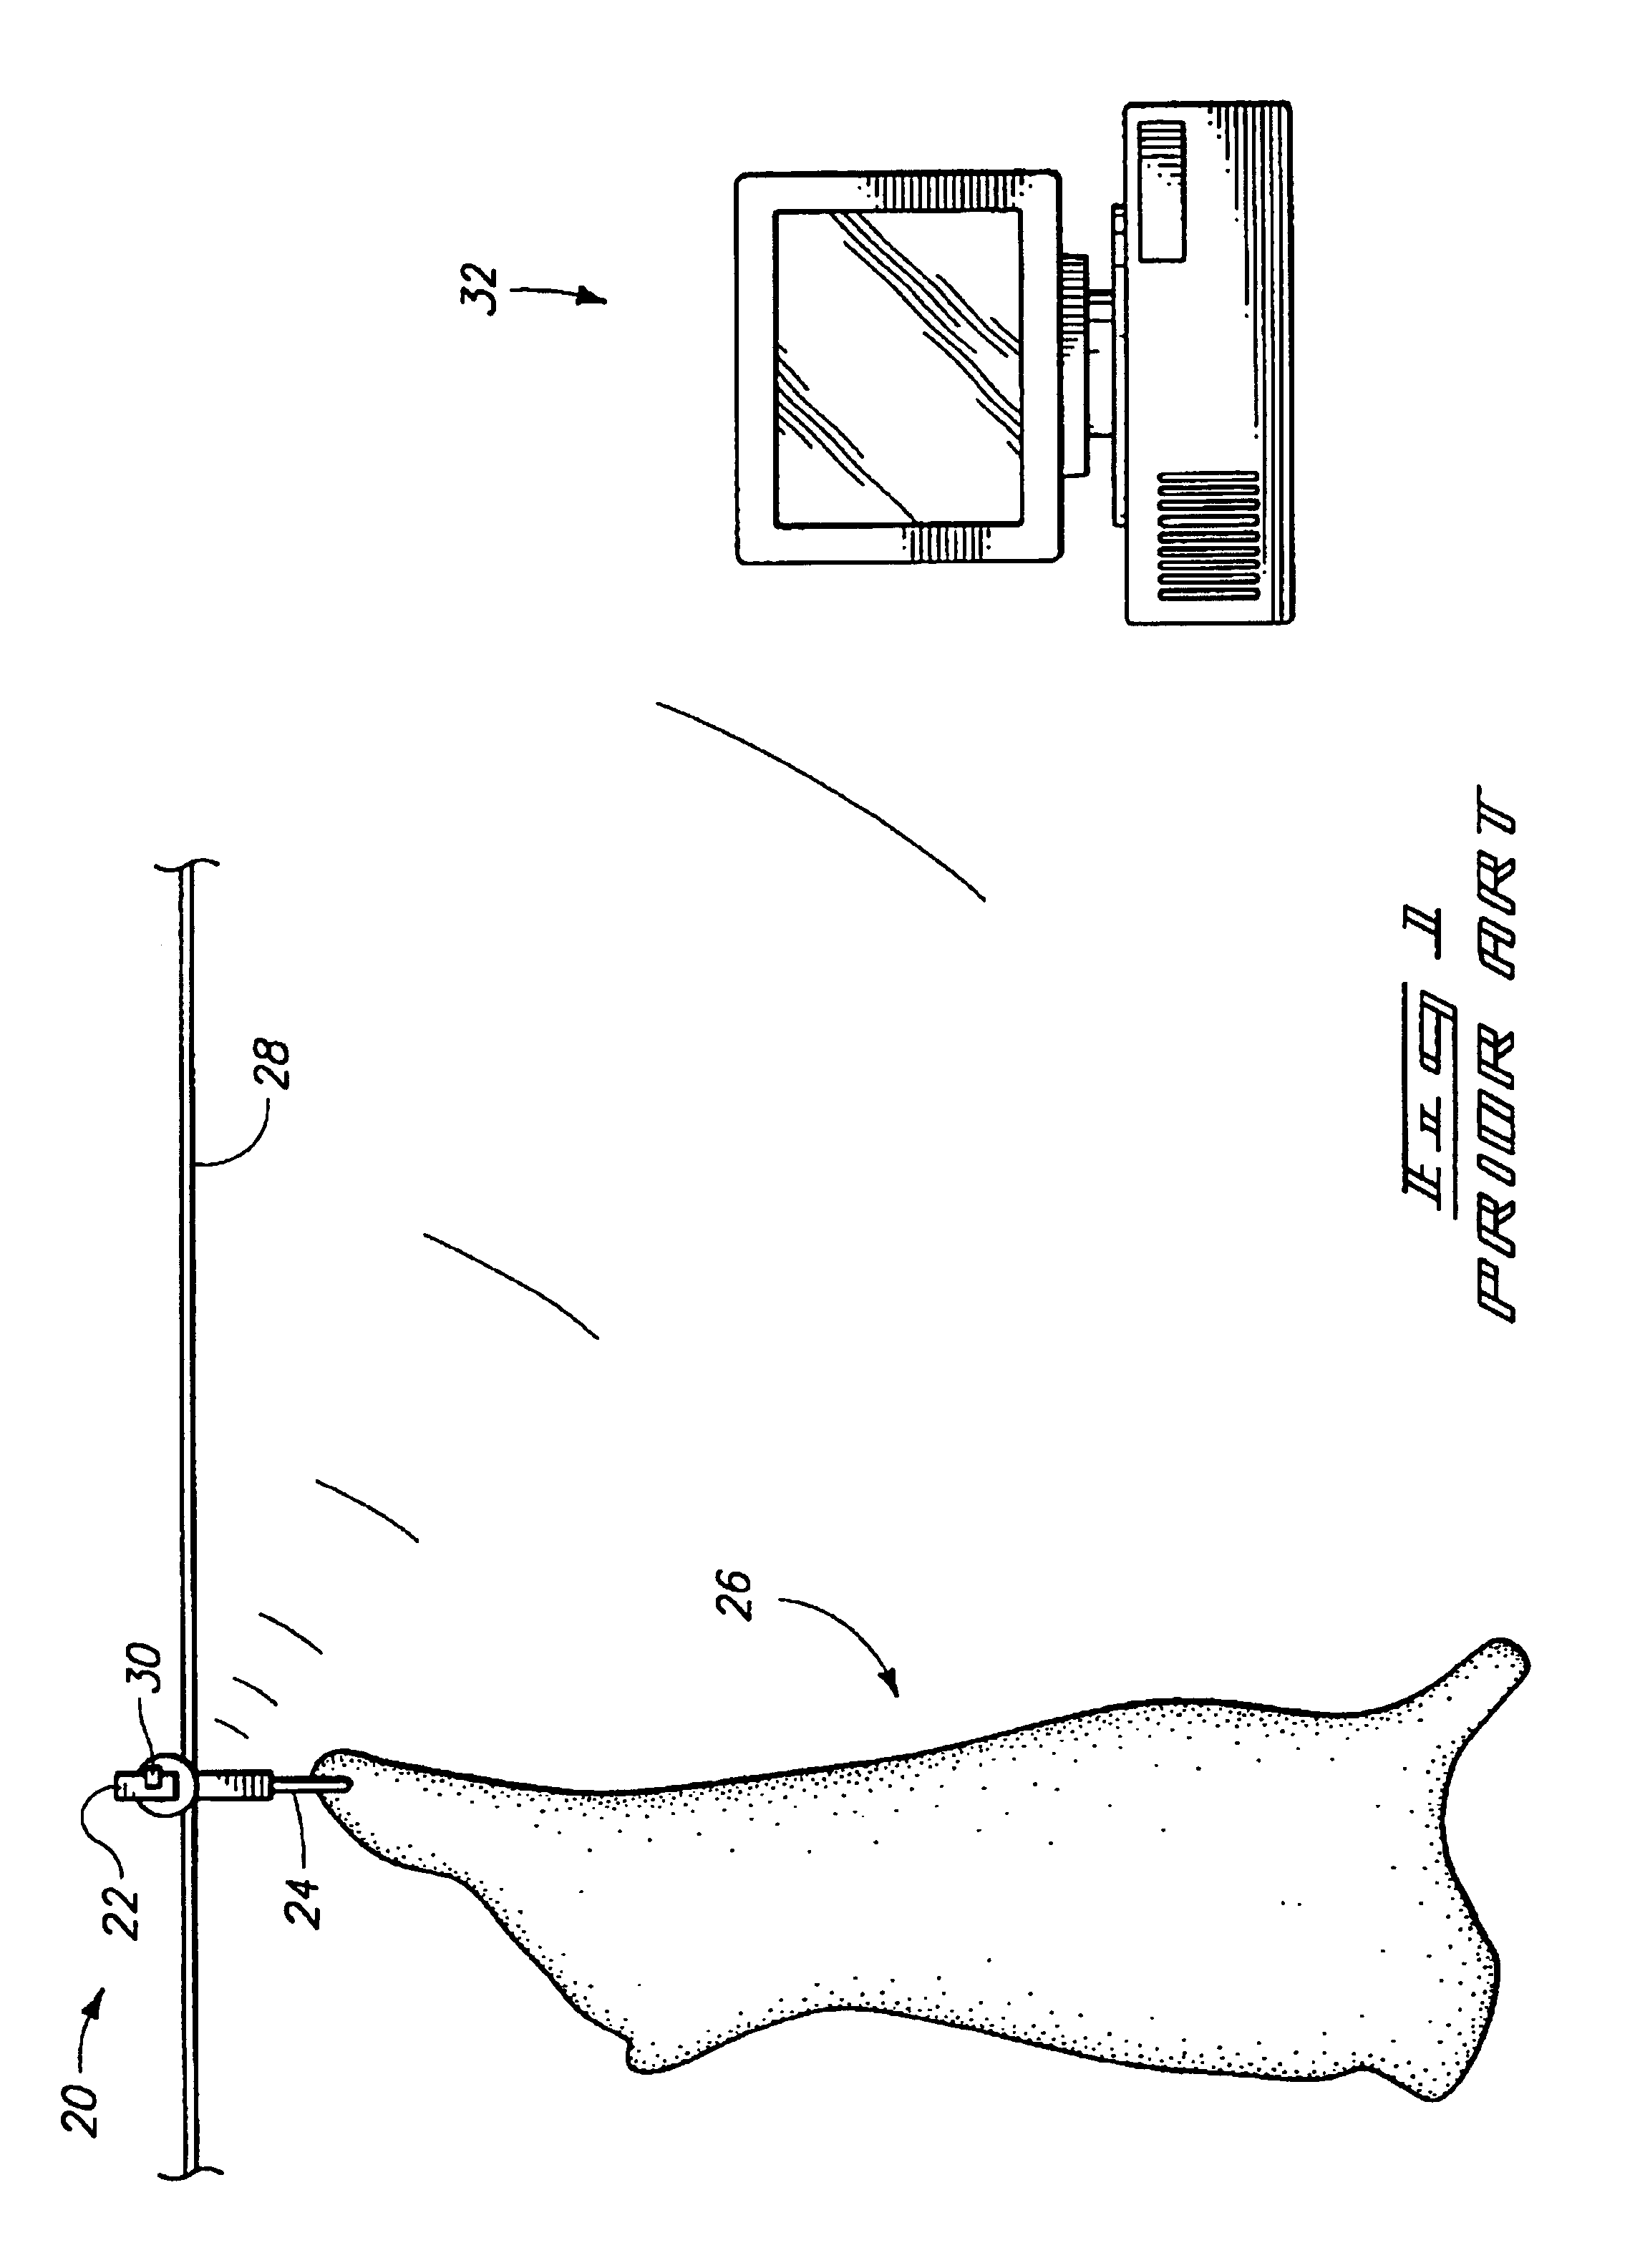 System and method for electronic tracking of units associated with a batch